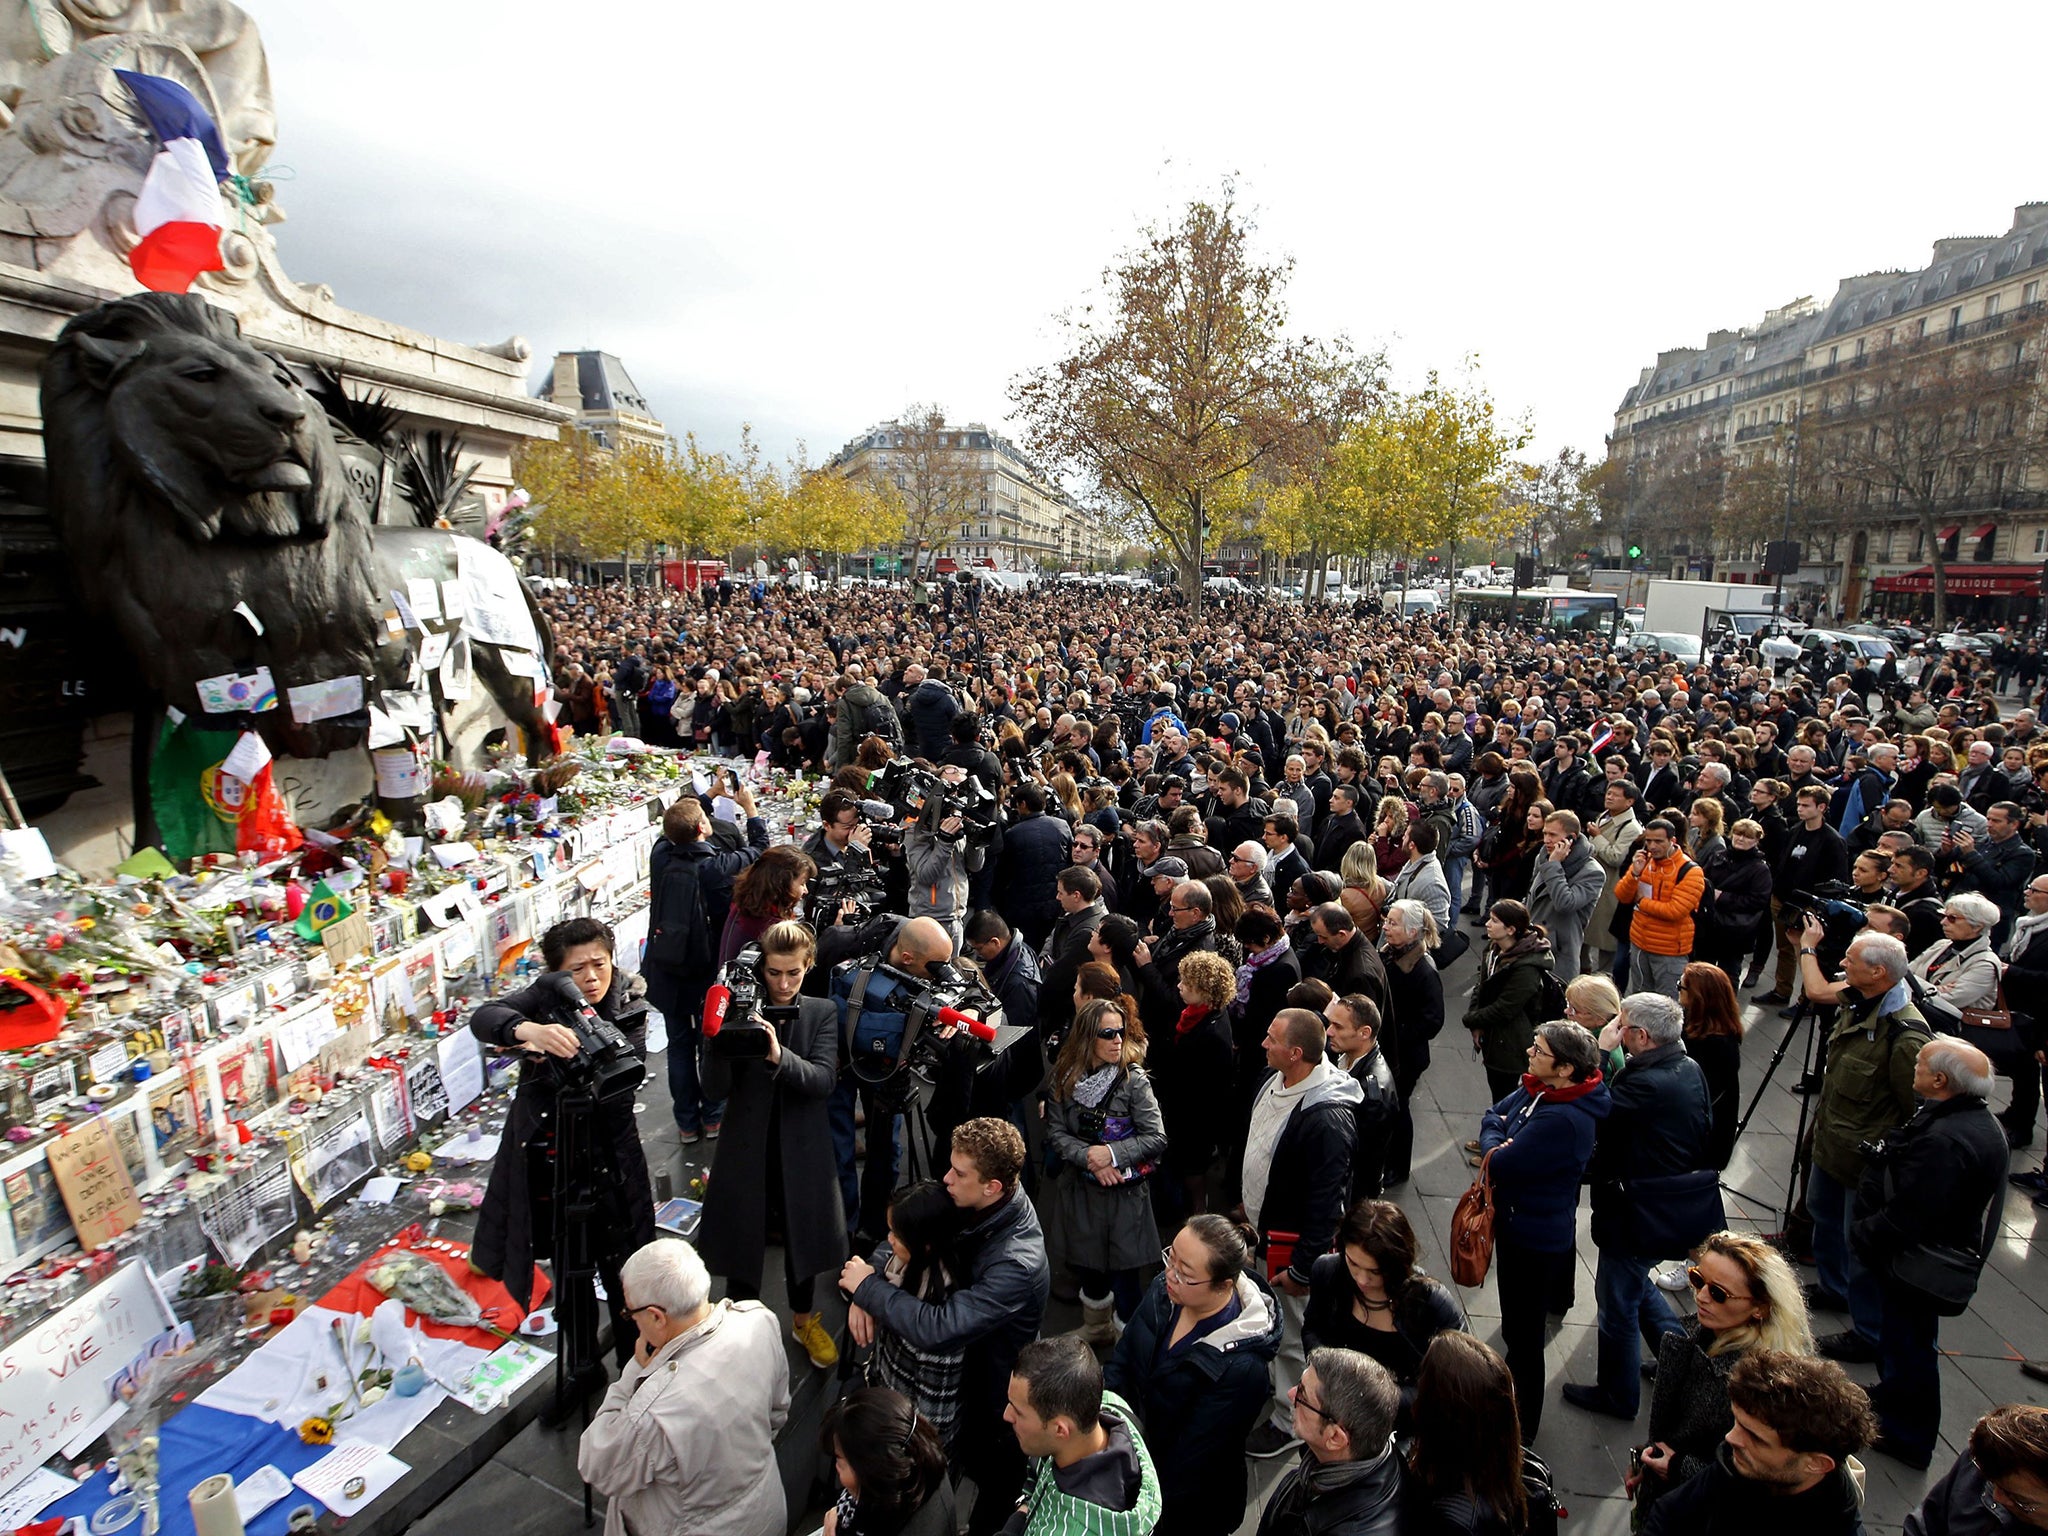 Crowds gather in the Place de la Republique, Paris to observe a minute's silence across Europe to mark the victims of the attacks in the French capital